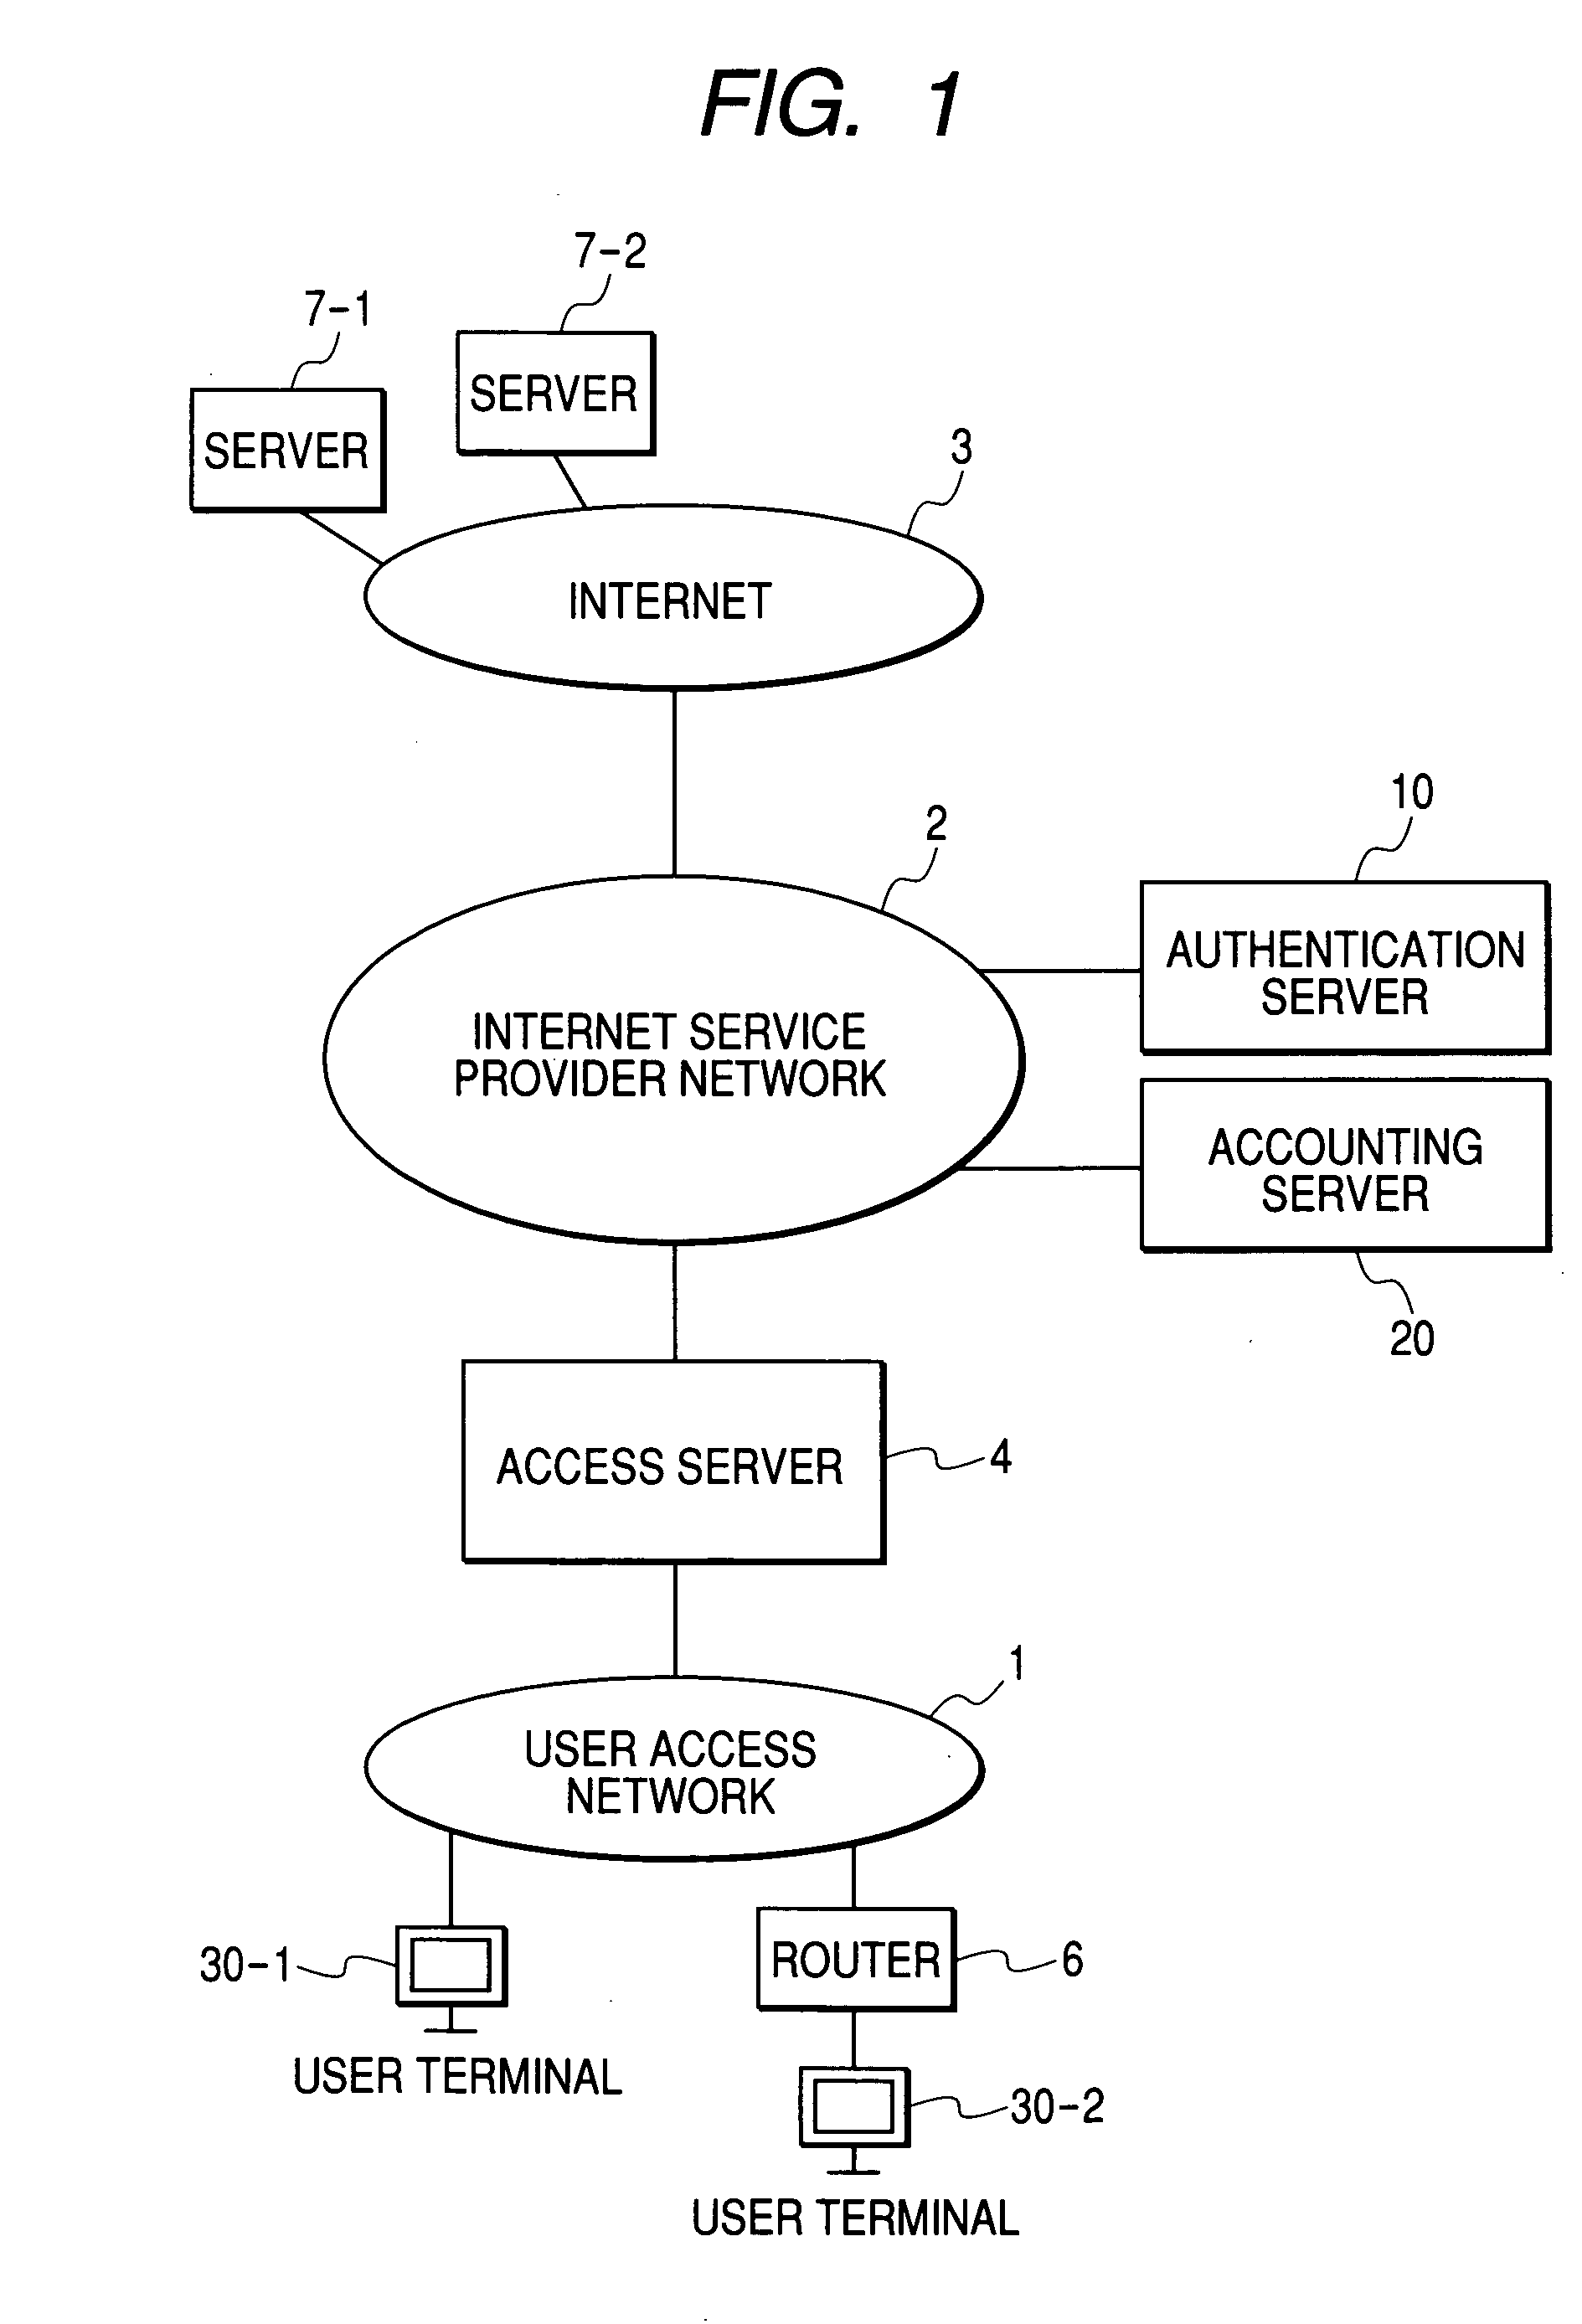 Access server with function of collecting communication statistics information